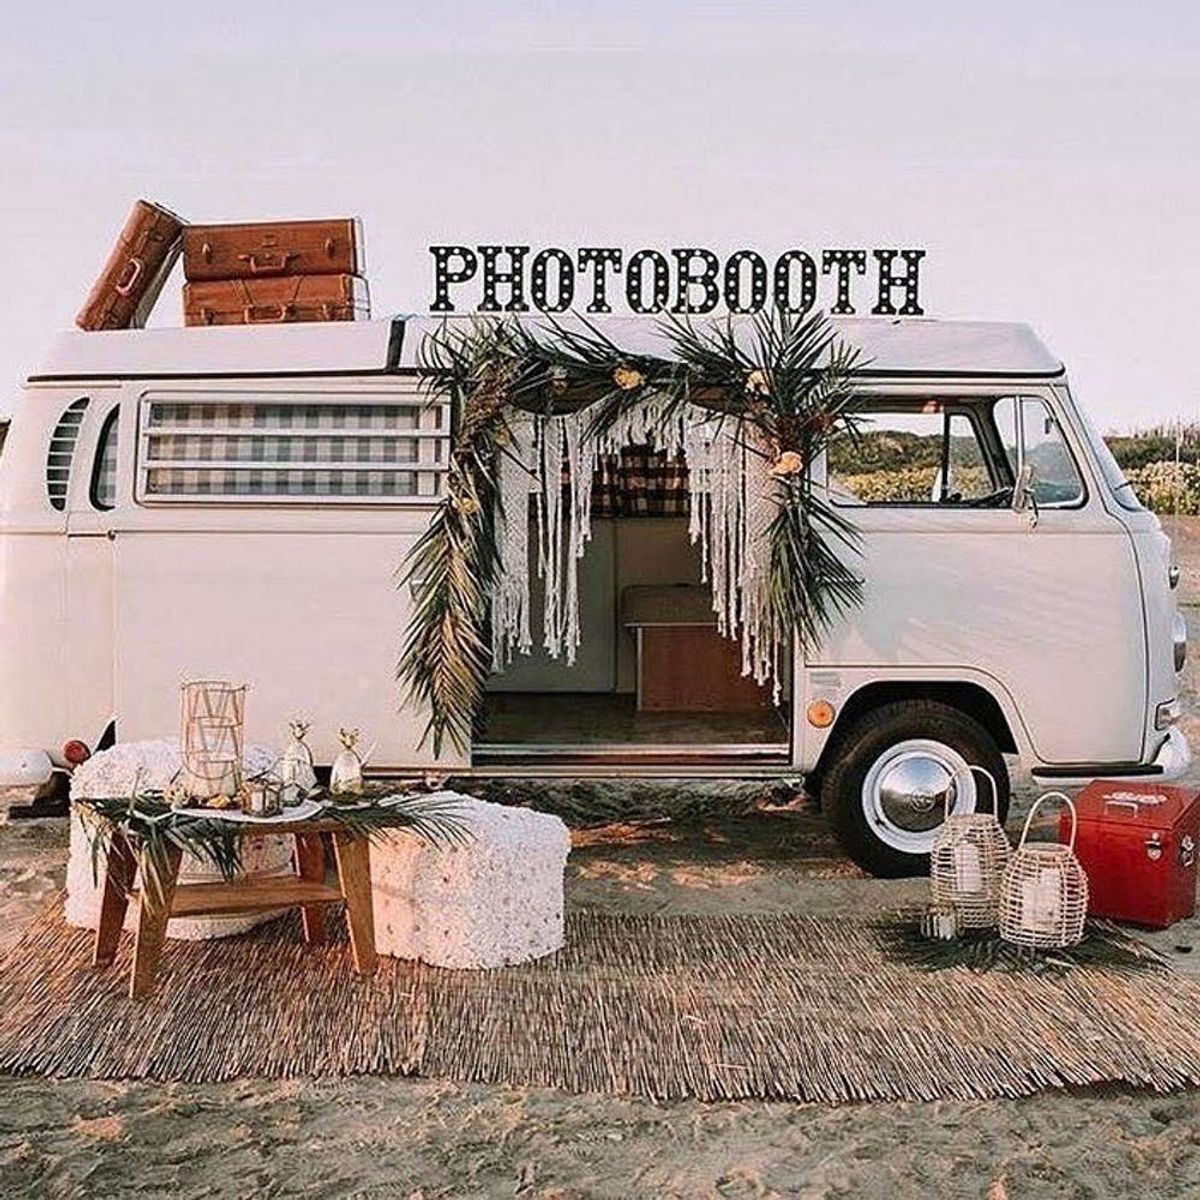 12 Instagrams to Follow for All the Macrame Wedding Vibes